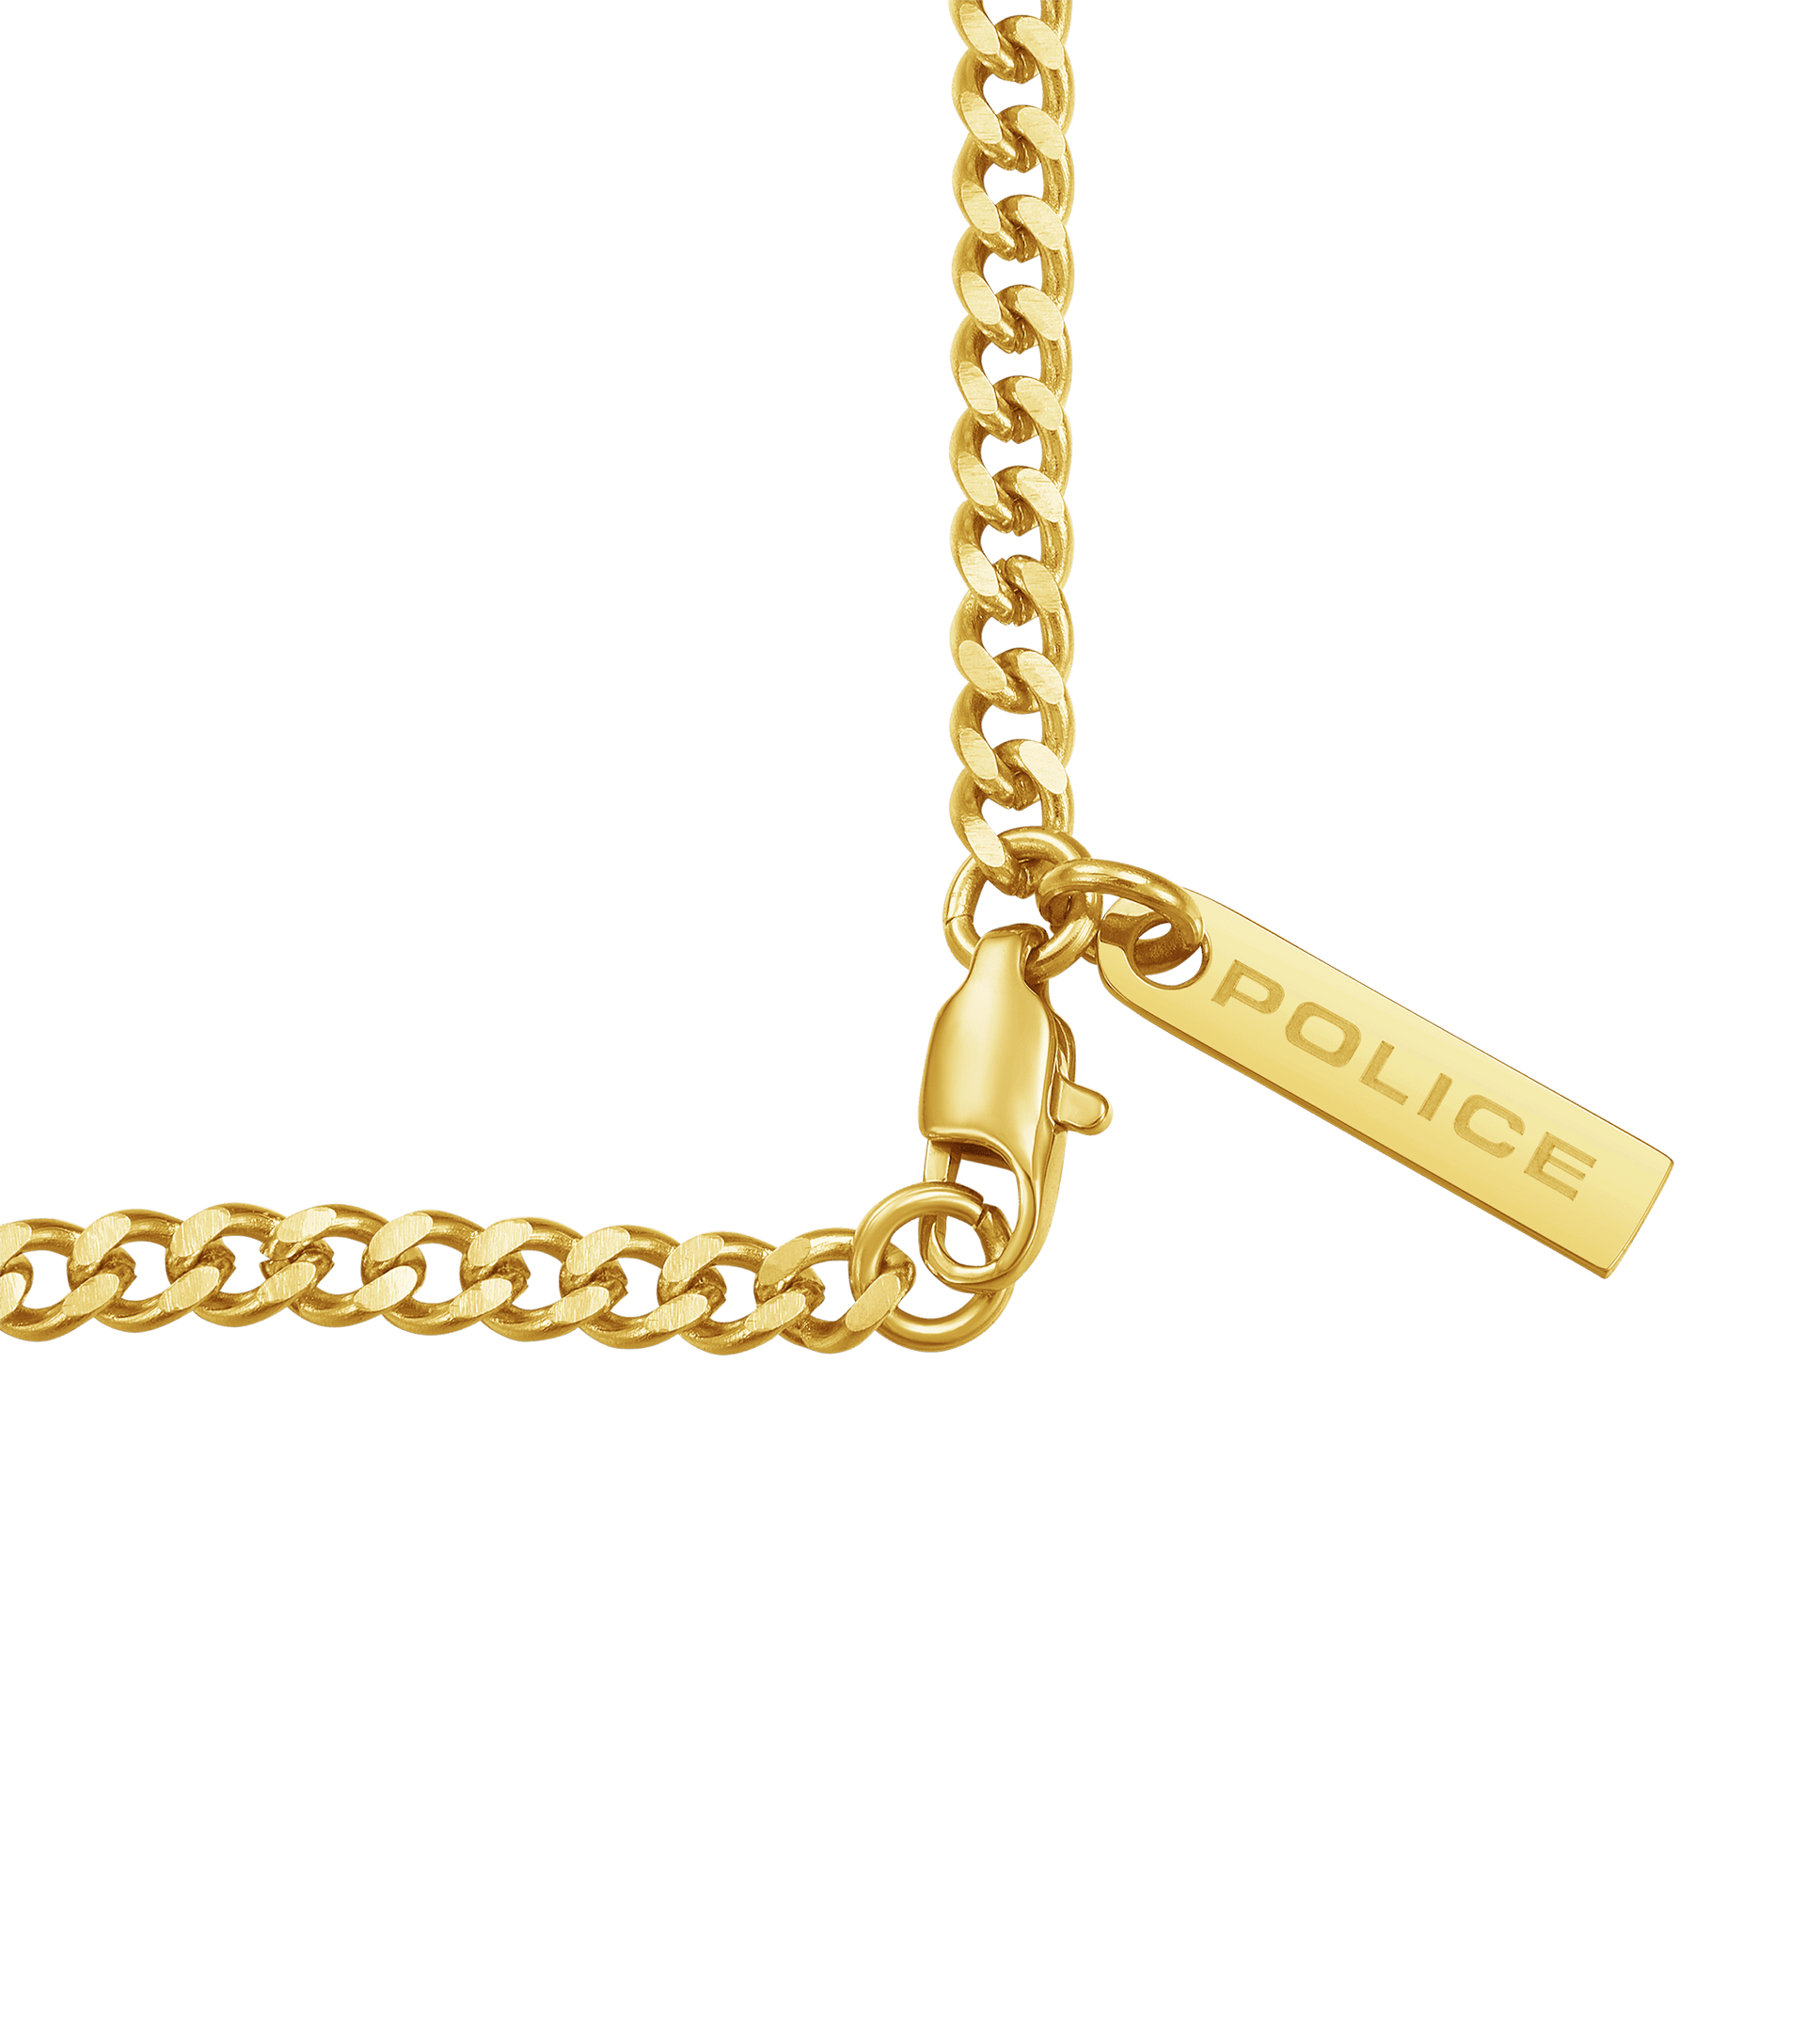 Police Men jewels - Link PEAGN0001804 By Necklace Police For